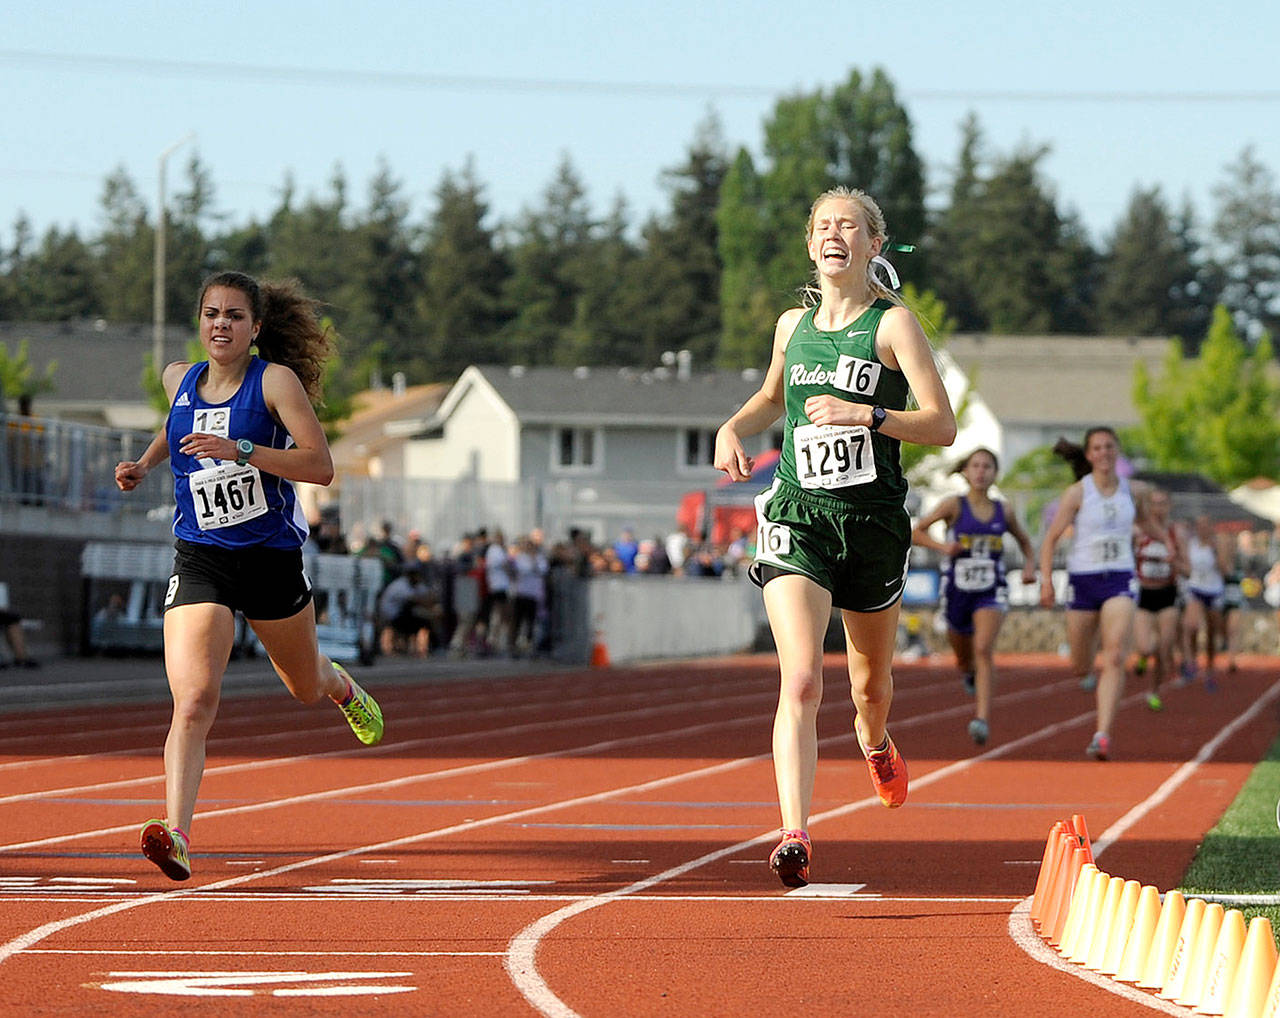 Port Angeles’ Gracie Long, right, reacts after winning the 1,600 meters at the state 2A Track and Field Championships at Mount Tahoma High School in Tacoma. At left is second place finisher Kristen Garcia of Sedro-Woolley. Long won with a personal-best time of 4:58.72. (Michael Dashiell/Olympic Peninsula News Group)